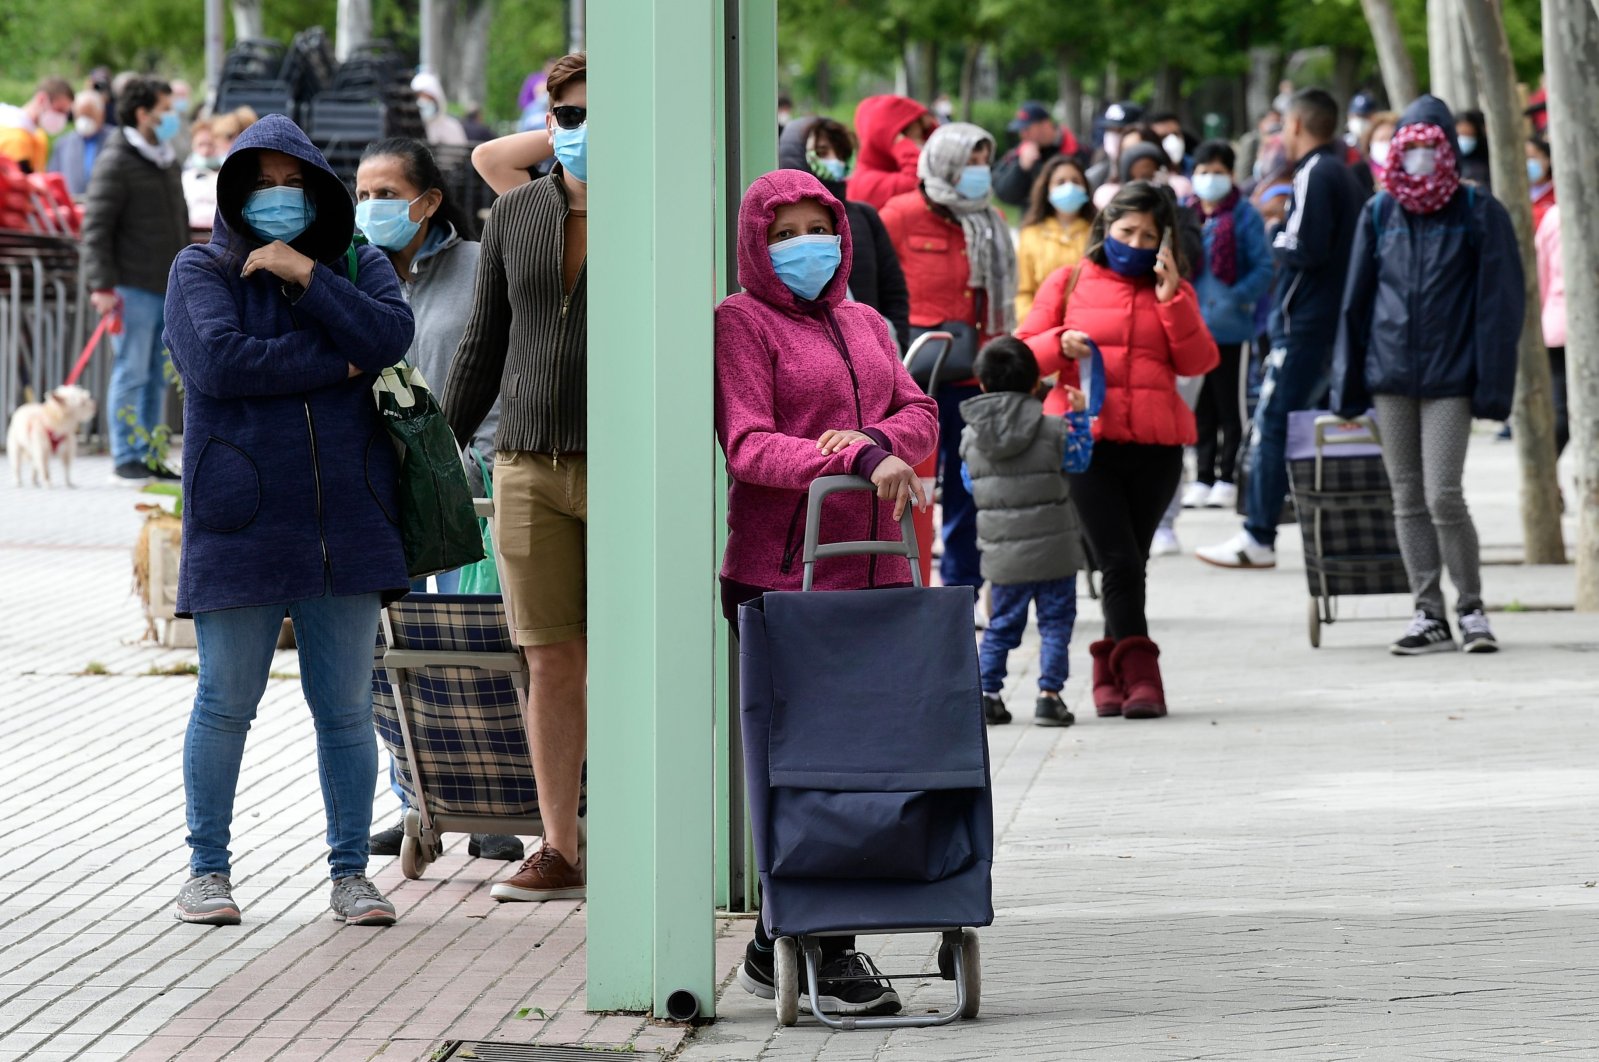 People queue to get a free food ration from the Aluche Neighborhood Association (AVA)'s food bank in Madrid, Spain, May 16, 2020. (AFP Photo)